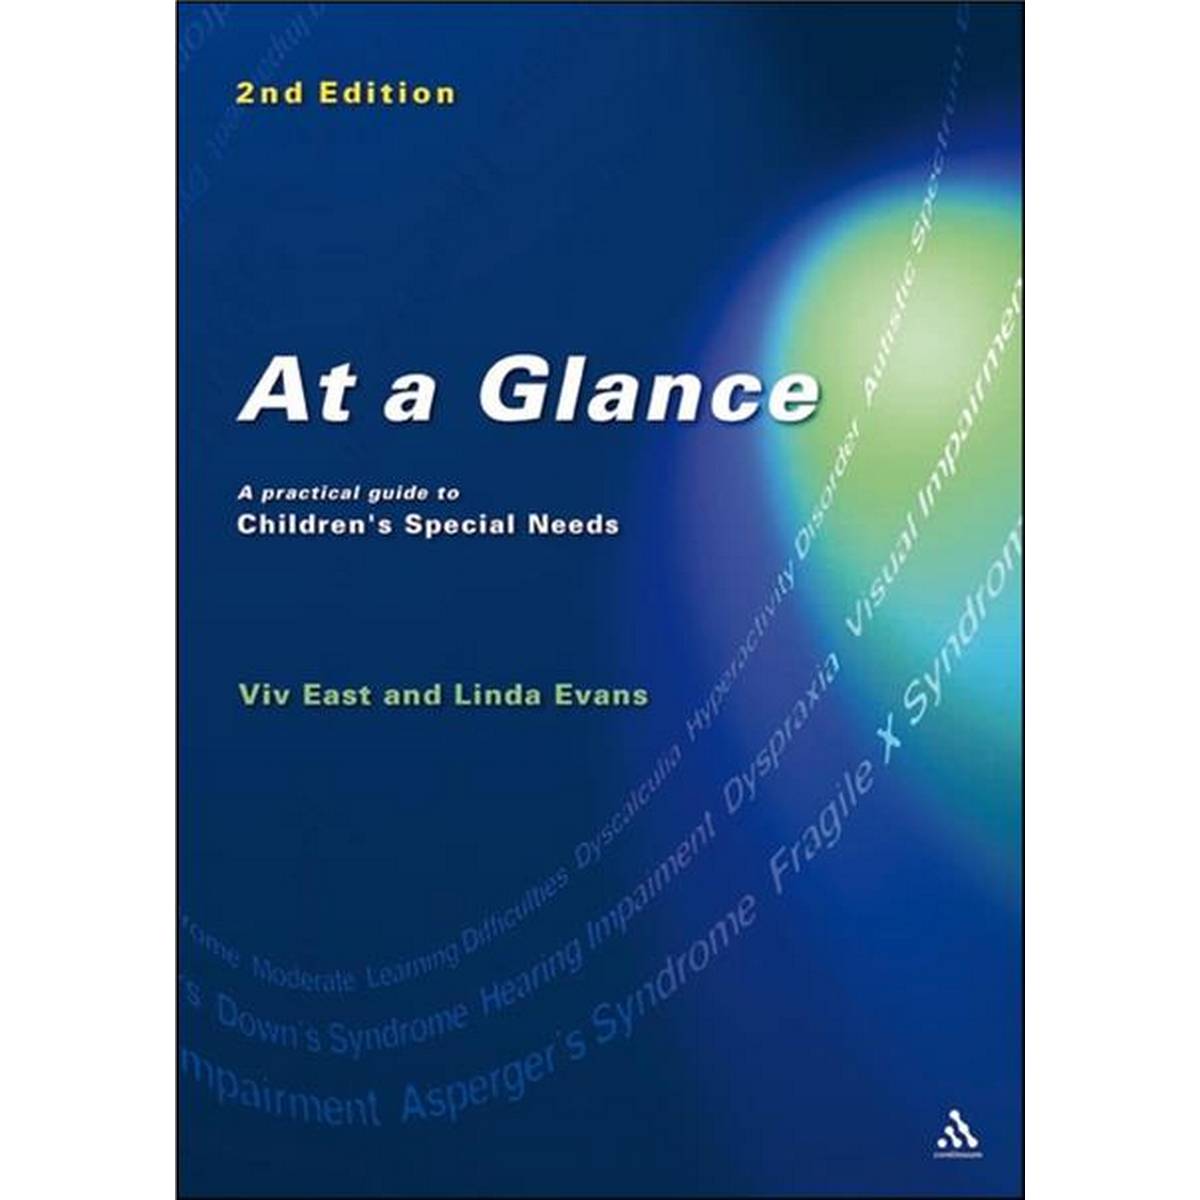 At a Glance - A Practical Guide to Children's Special Needs (2nd Edition)